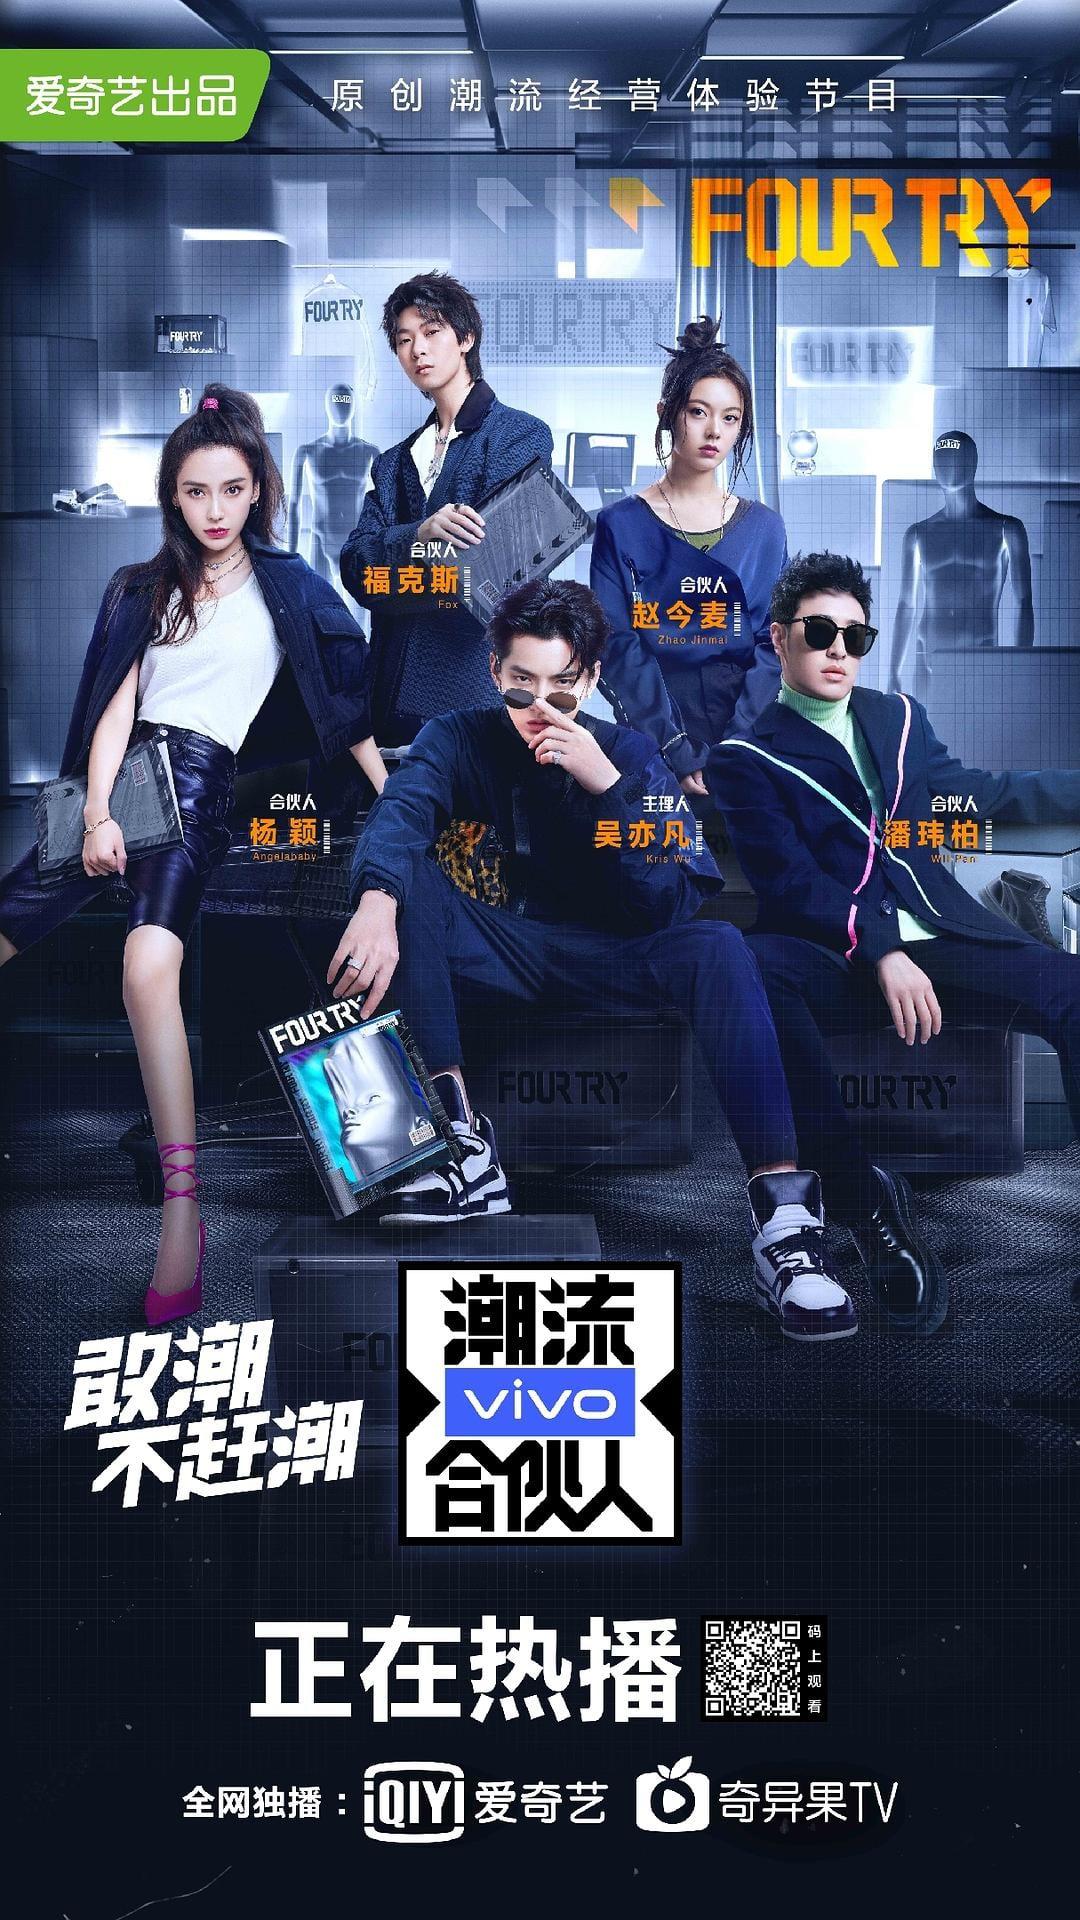 TV ratings for Four Try(潮流合伙人) in Francia. iqiyi TV series